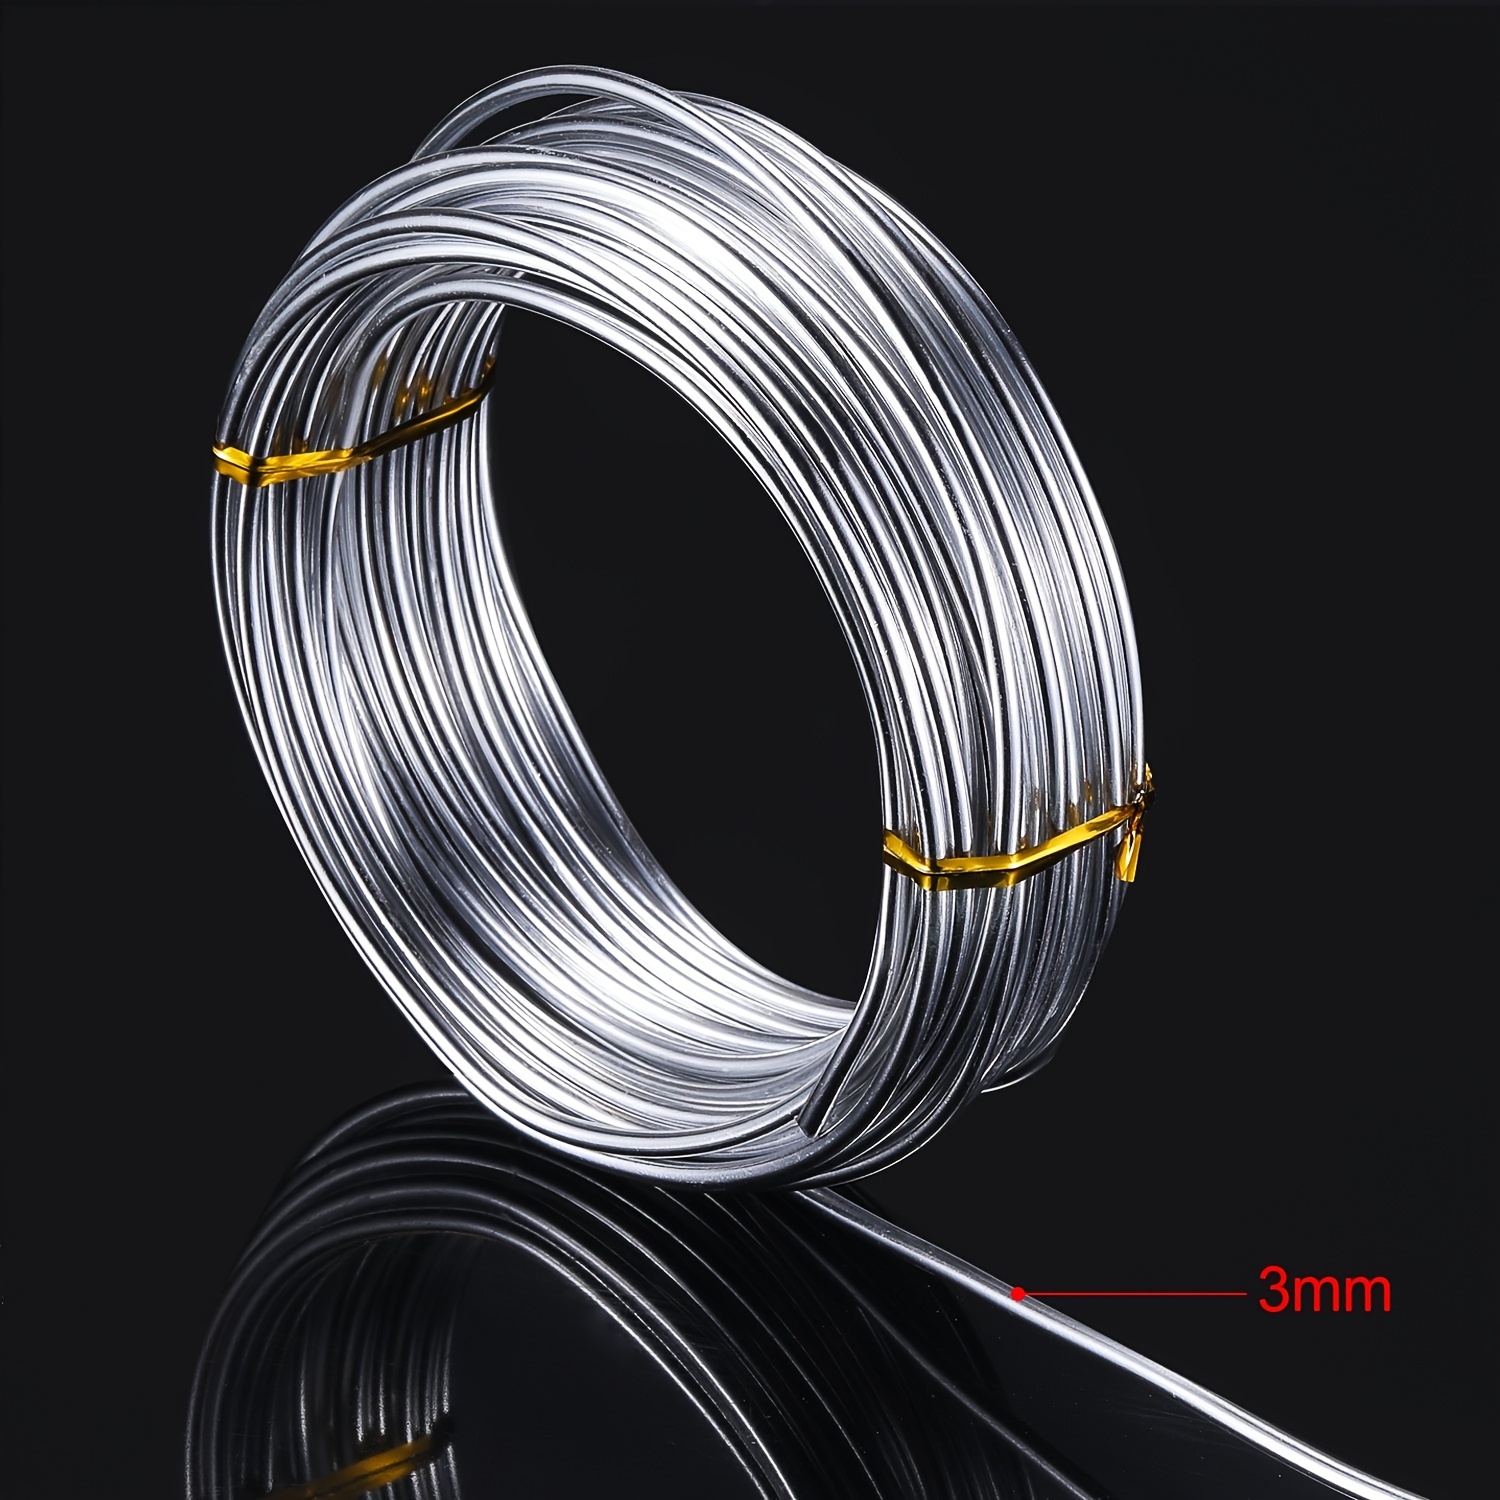 Aluminum Wire, Bendable Metal Craft Wire for Making DIY Crafts 17